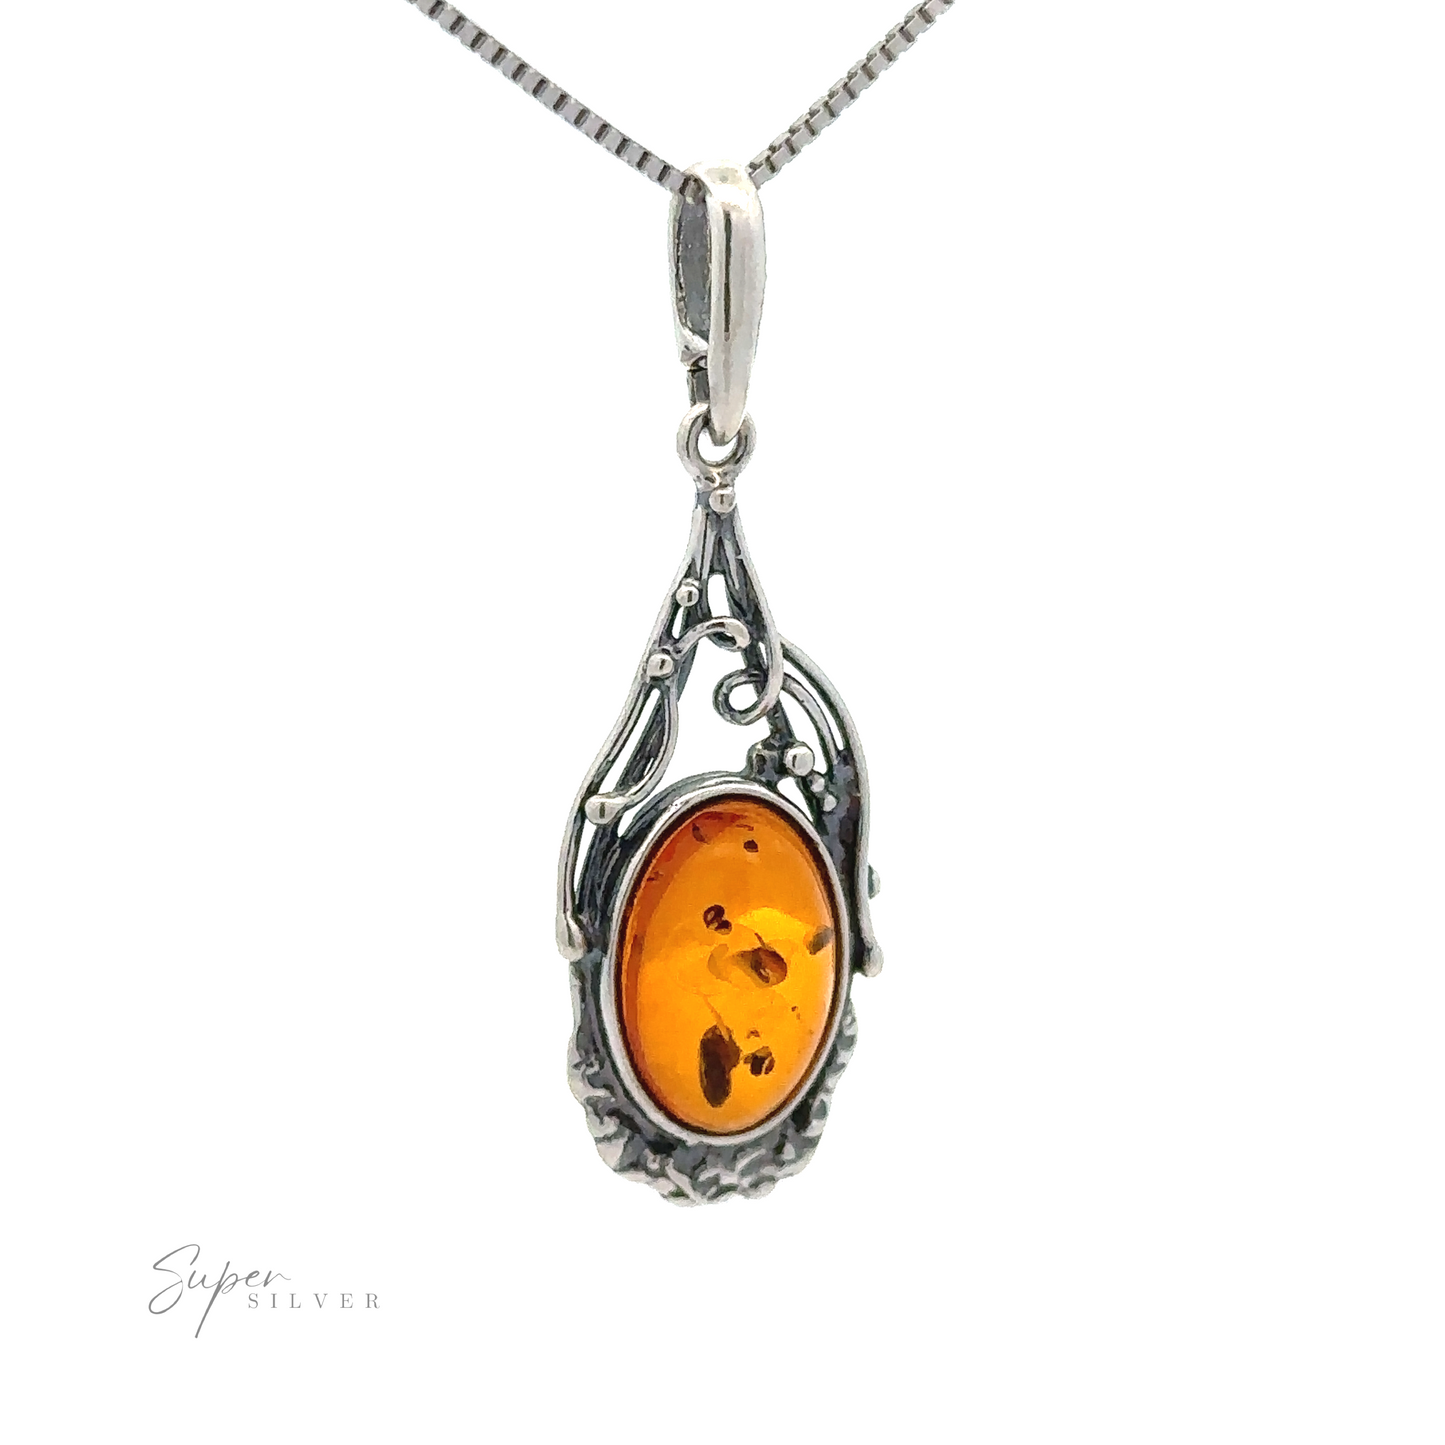 
                  
                    A vintage-styled silver necklace with an ornate pendant featuring an Antique Style Amber Pendant set in an intricate, old-world design.
                  
                